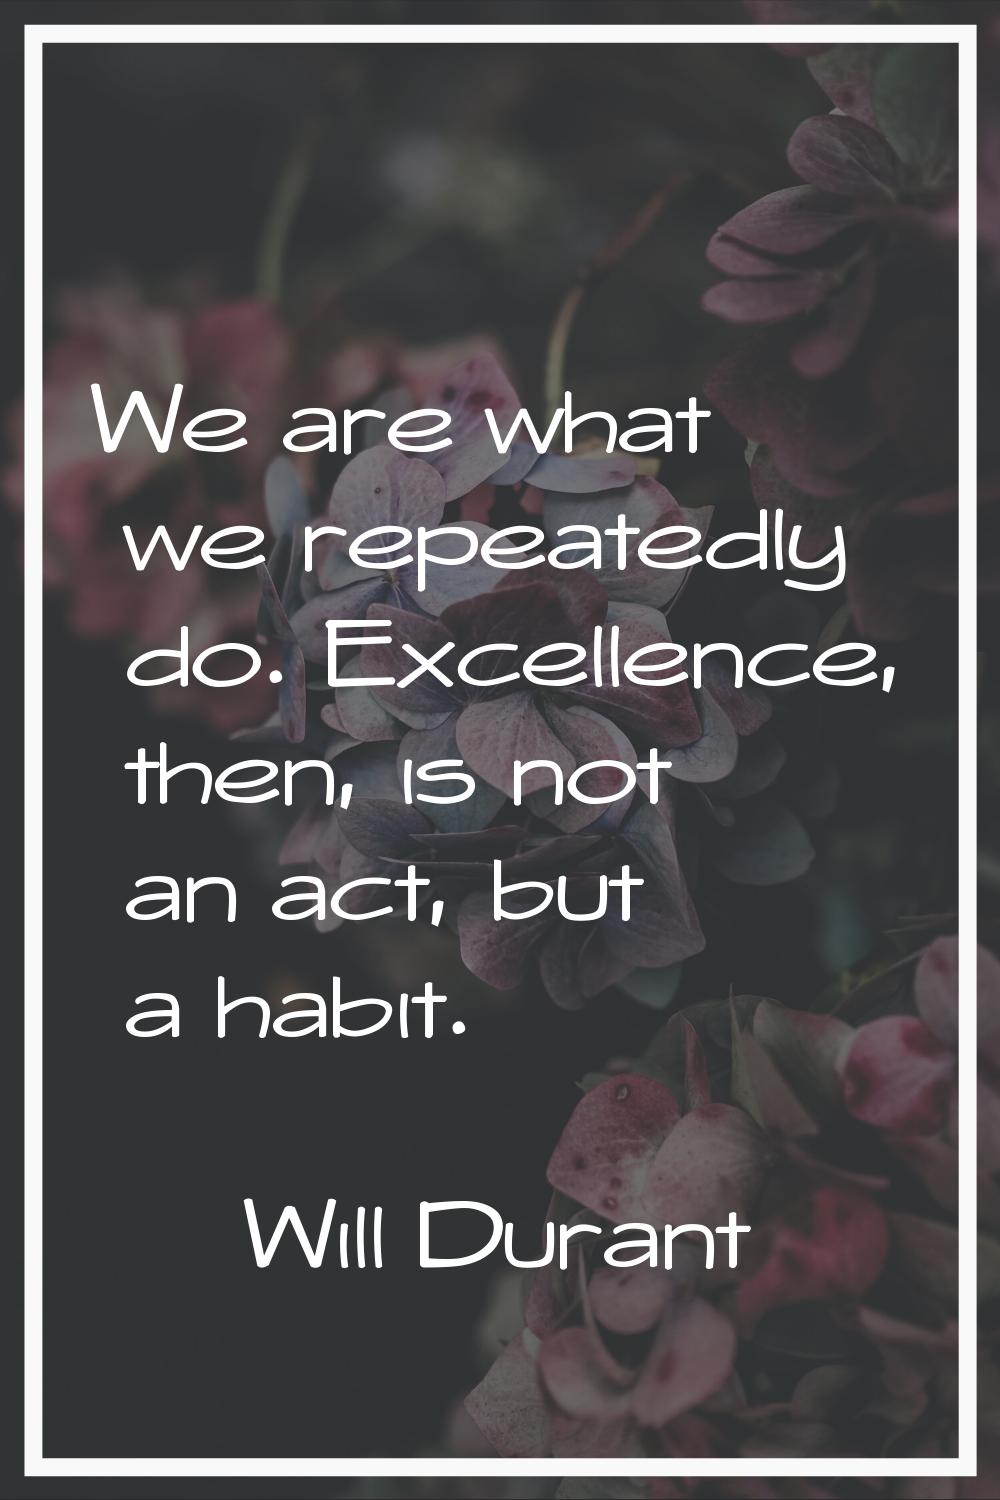 We are what we repeatedly do. Excellence, then, is not an act, but a habit.